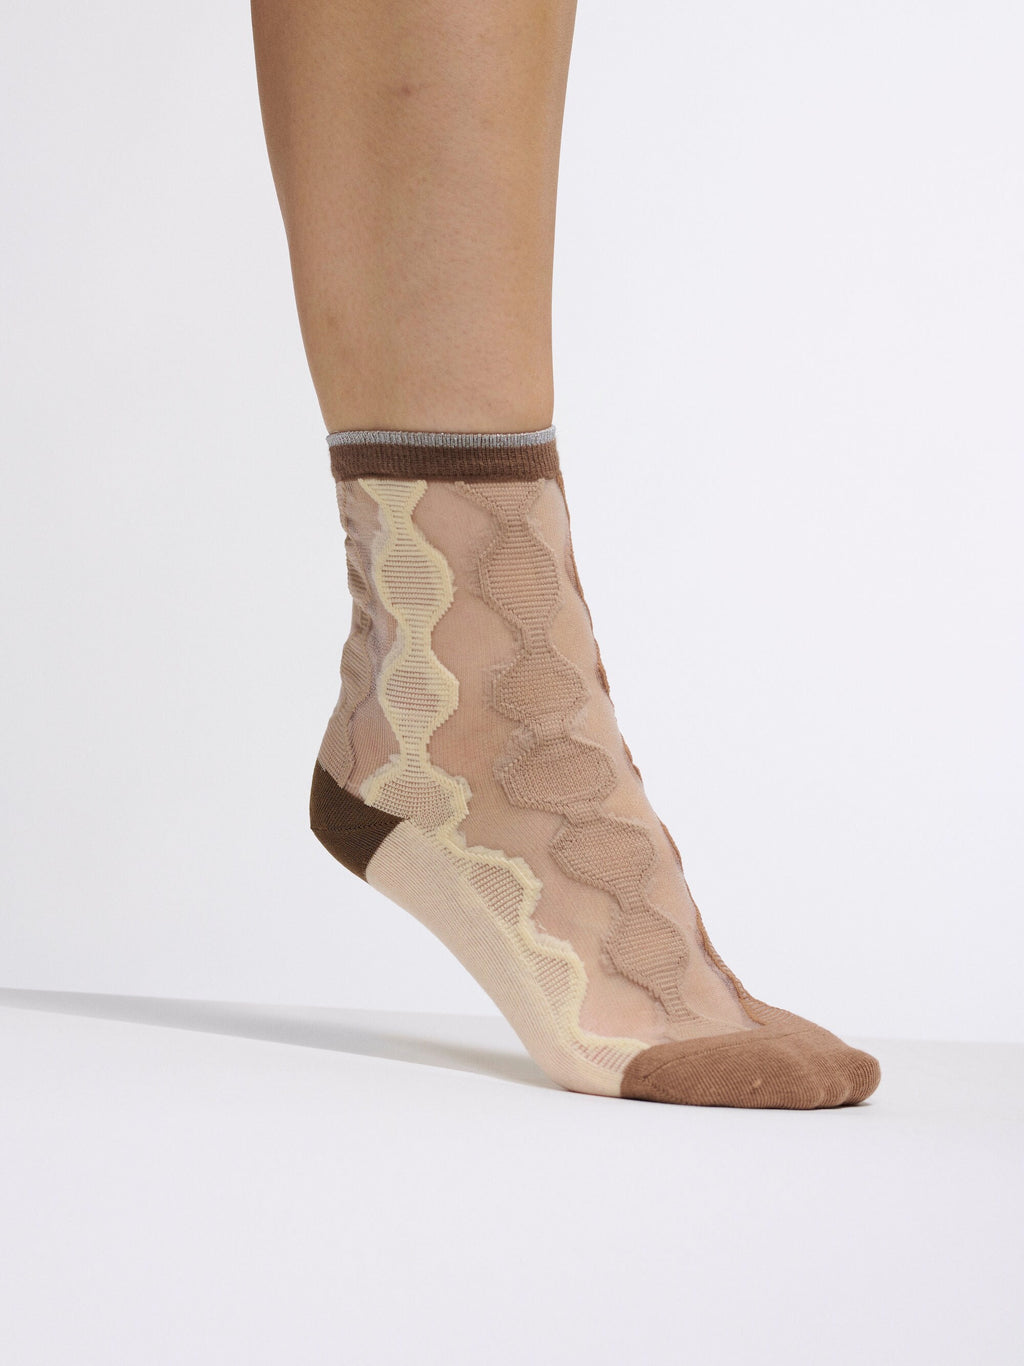 The Semi Sheer Cappuccino Socks | A Sweet Confection for Vintage Cottagecore Vibes | Cutout Socks in Brown Tan and Beige | Goose Taffy